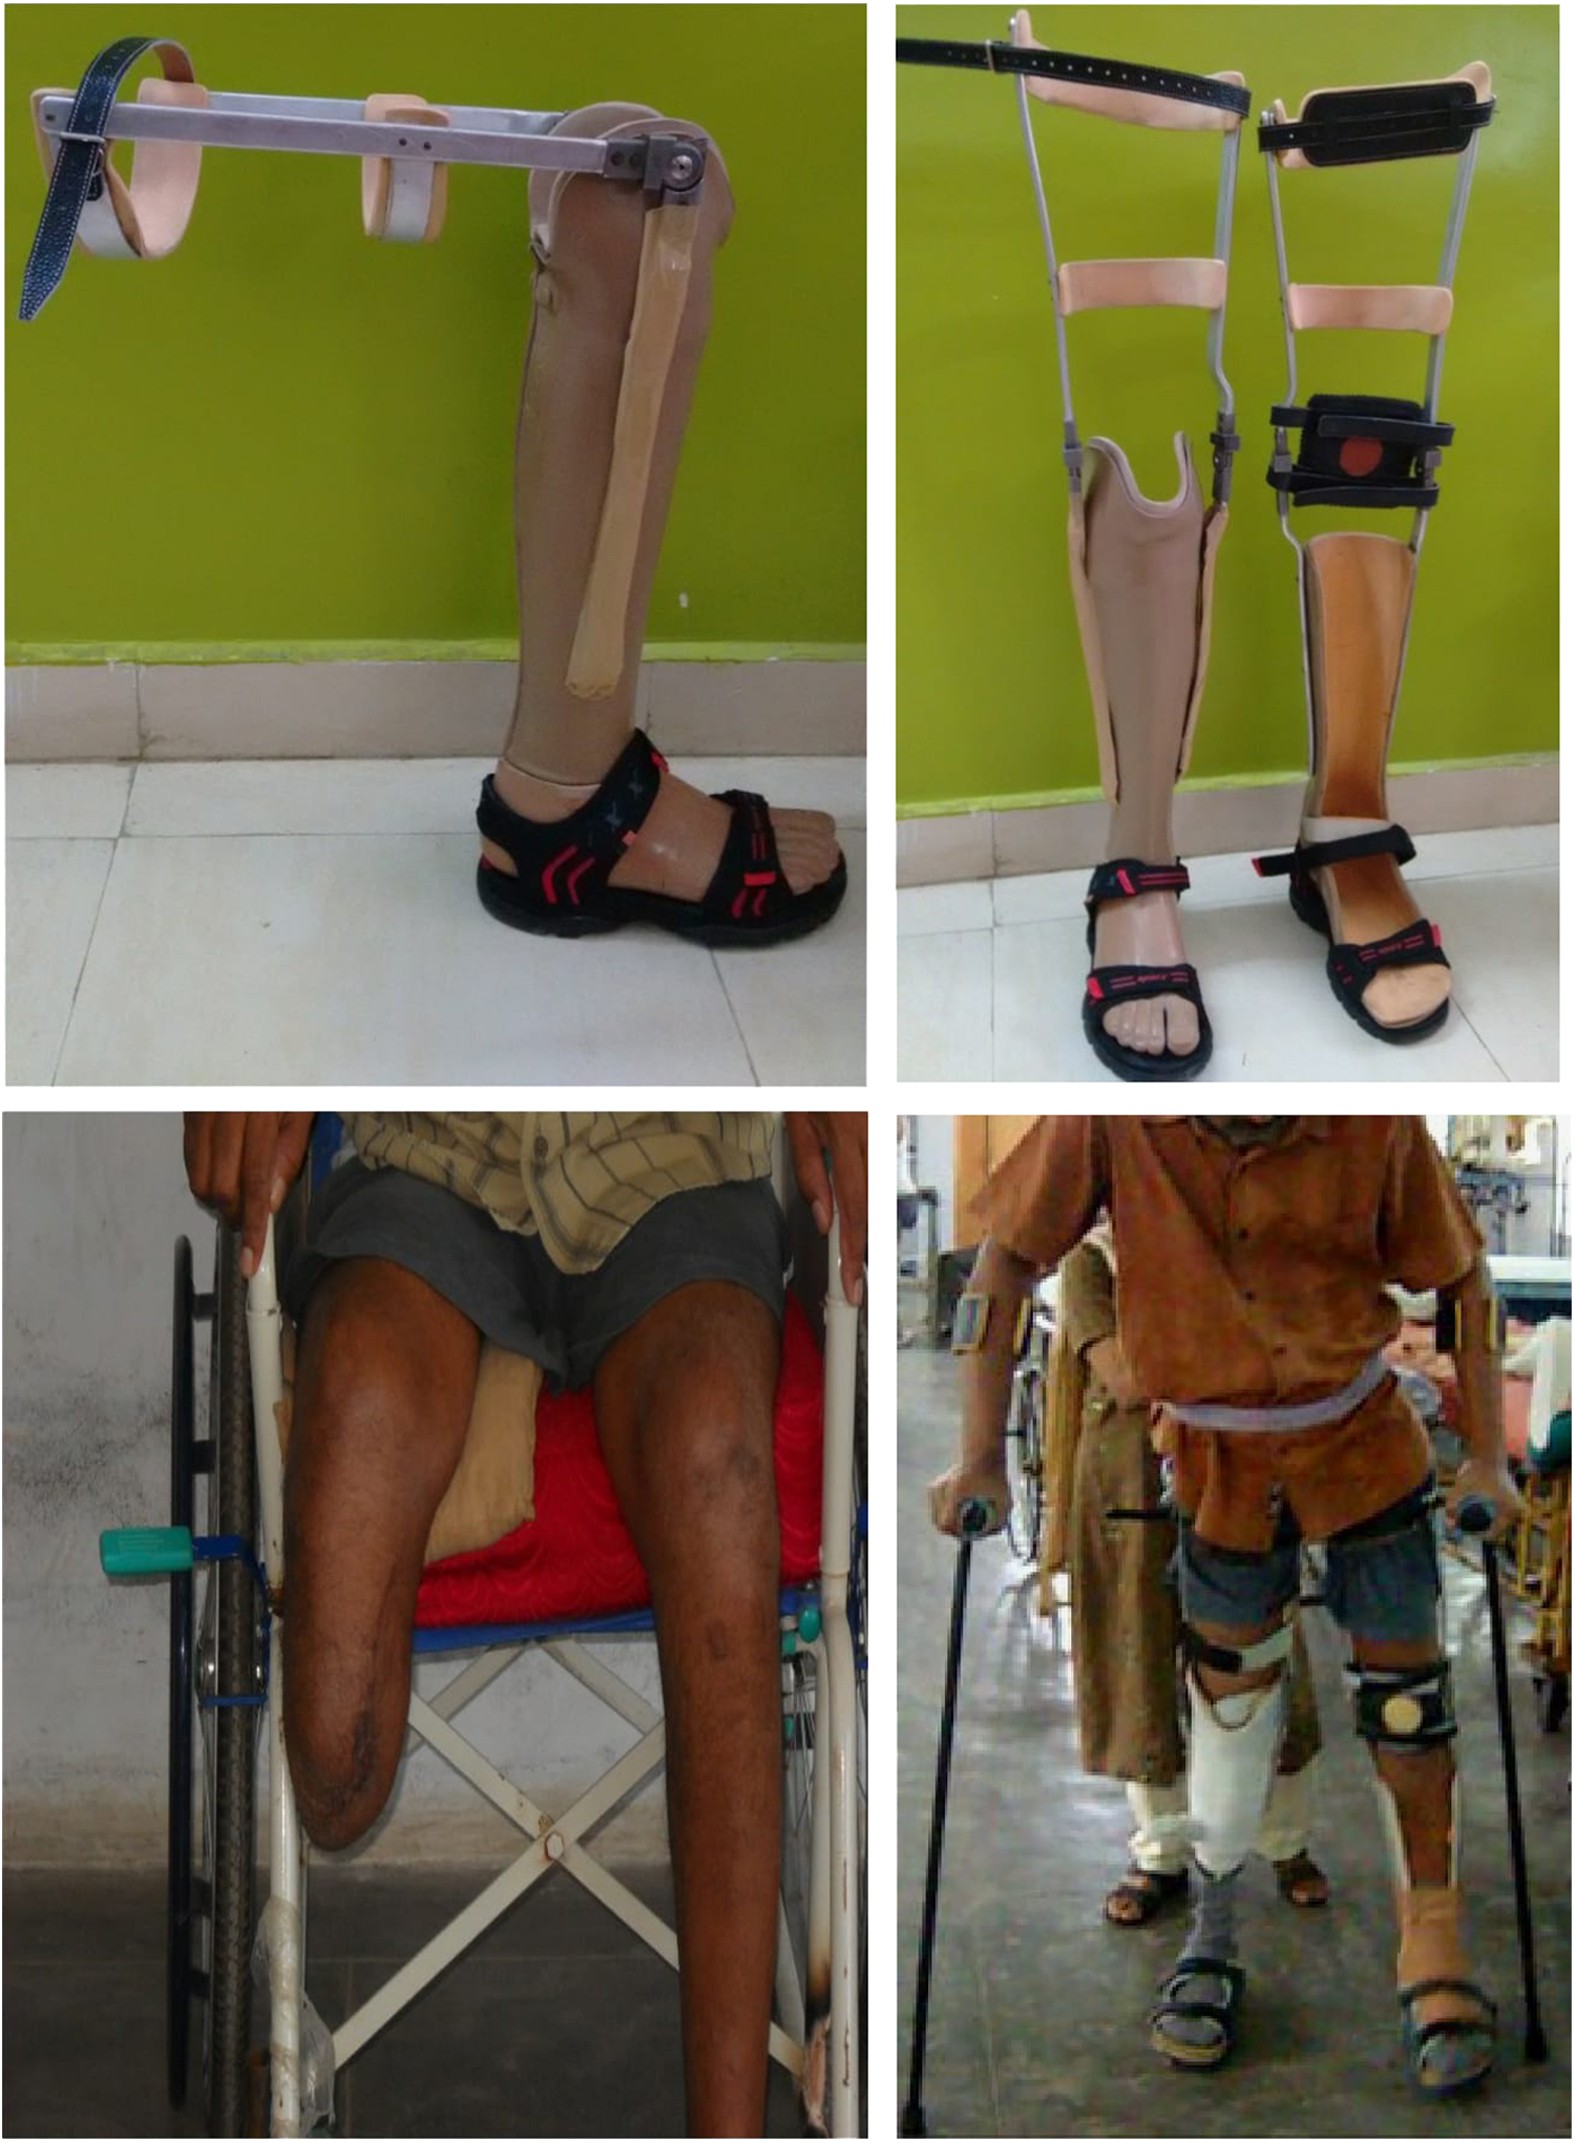 Focus on Bilateral Above-Knee Amputees - Amputee Coalition